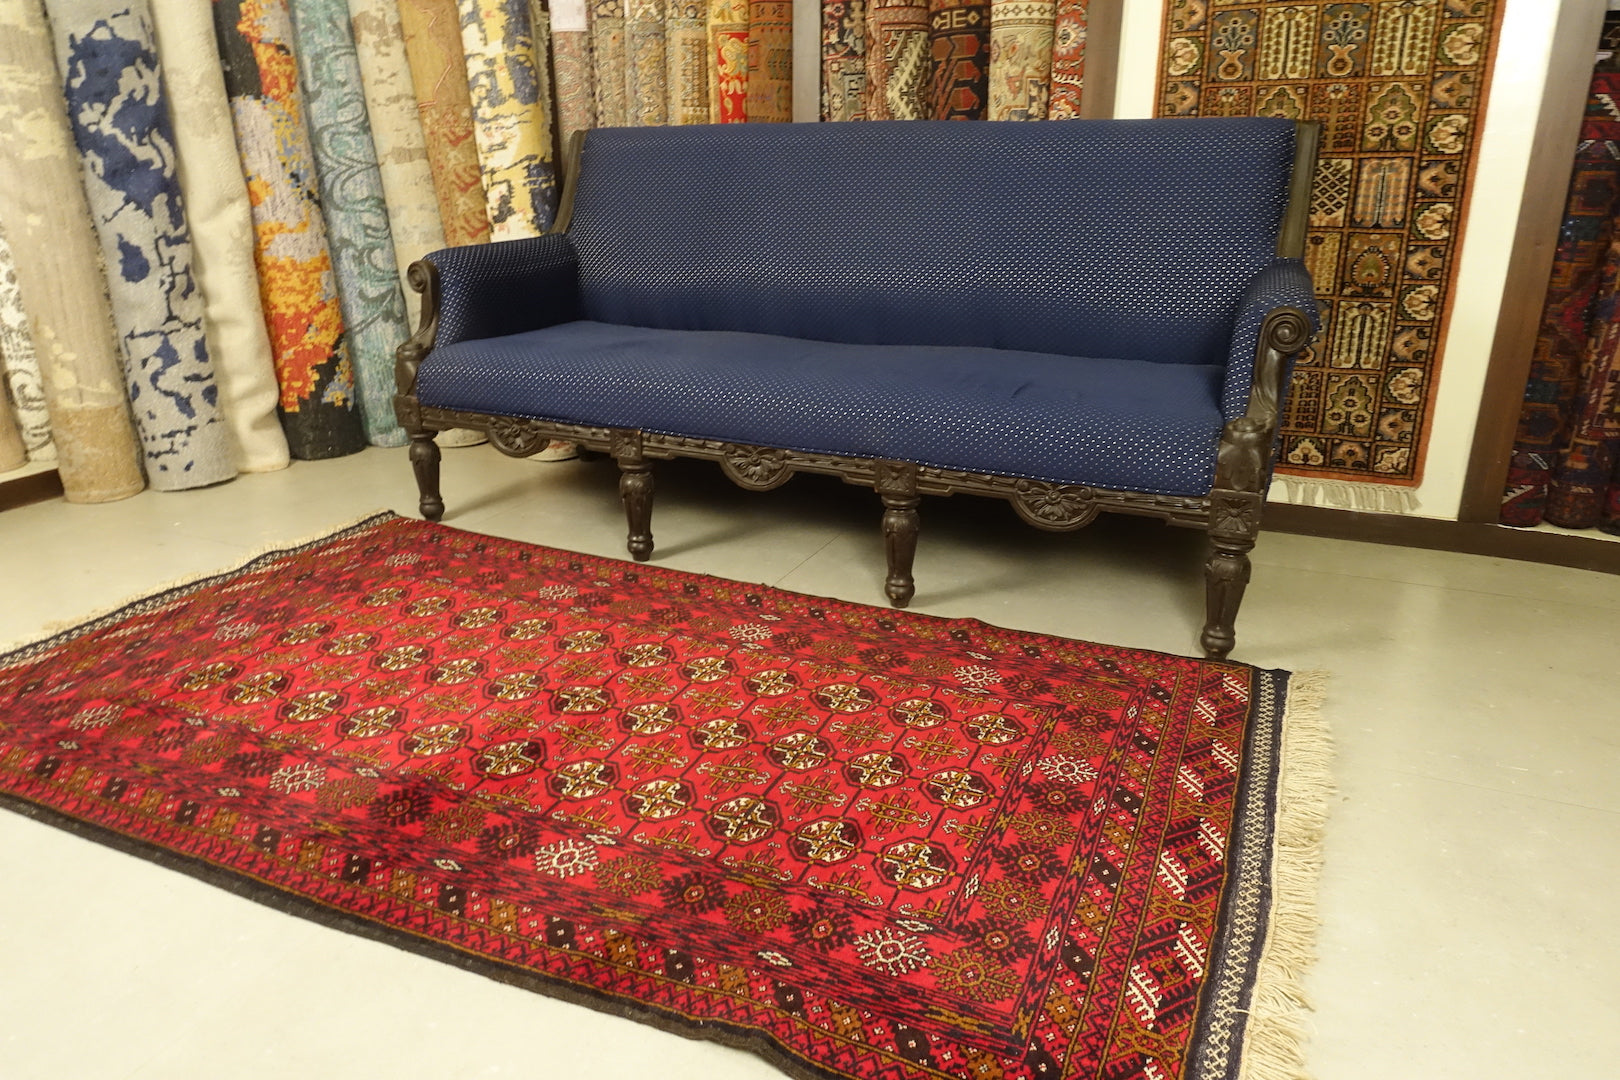 A 4 feet by 6.5 feet Afghan wool rug, the colours used on the rug are red,blue,beige and rust.